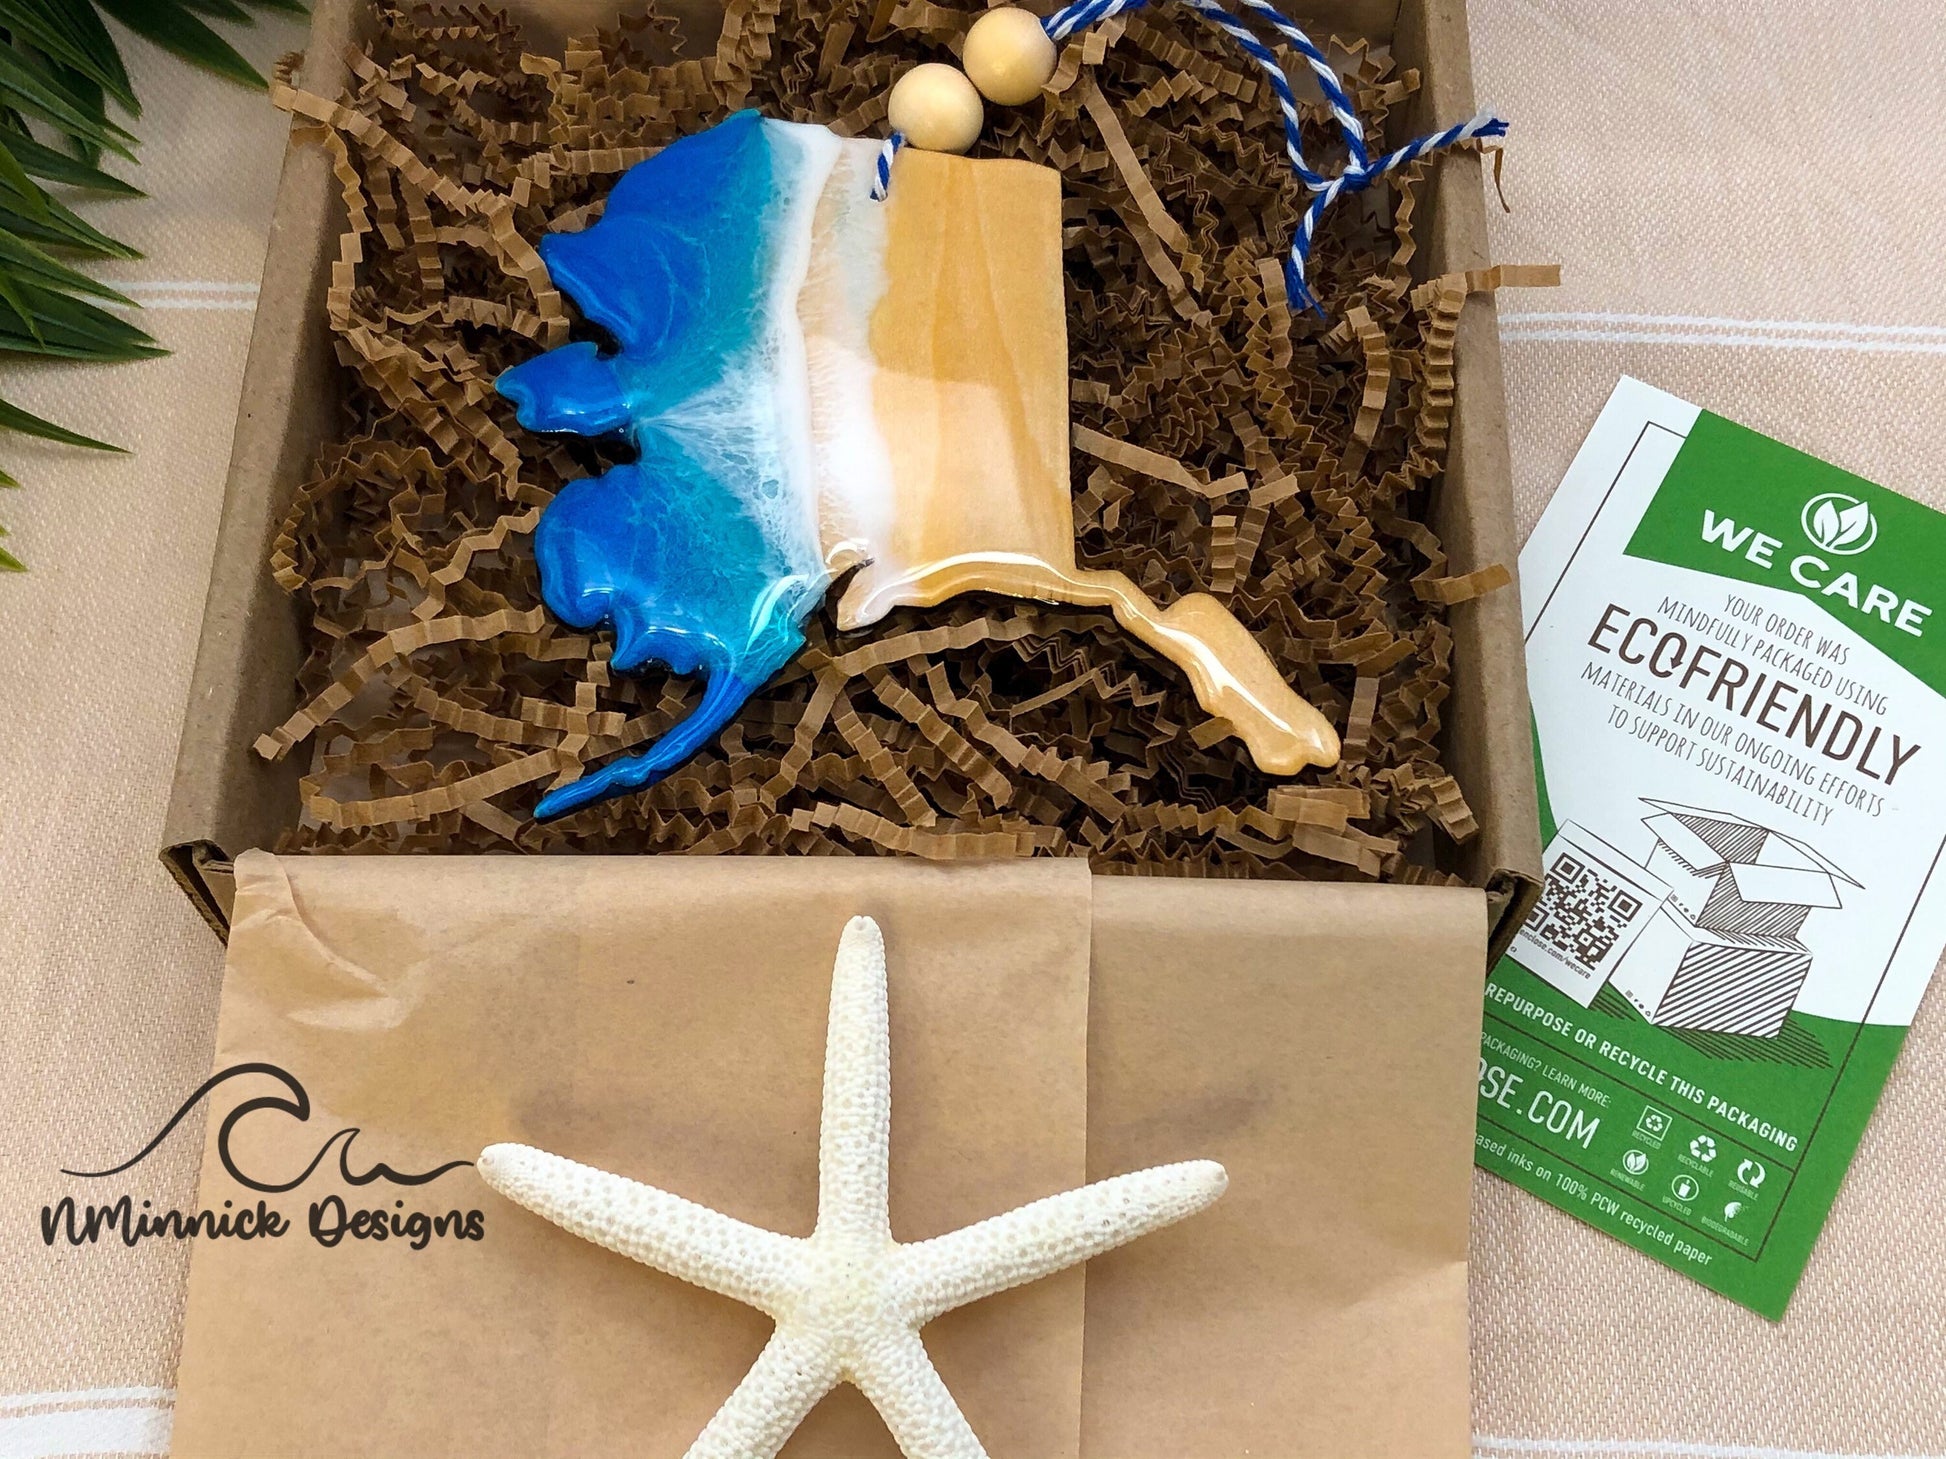 Alaska shaped ocean ornament packaged in ecofriendly plastic free materials with recyclable box, tissue paper and paper shred.